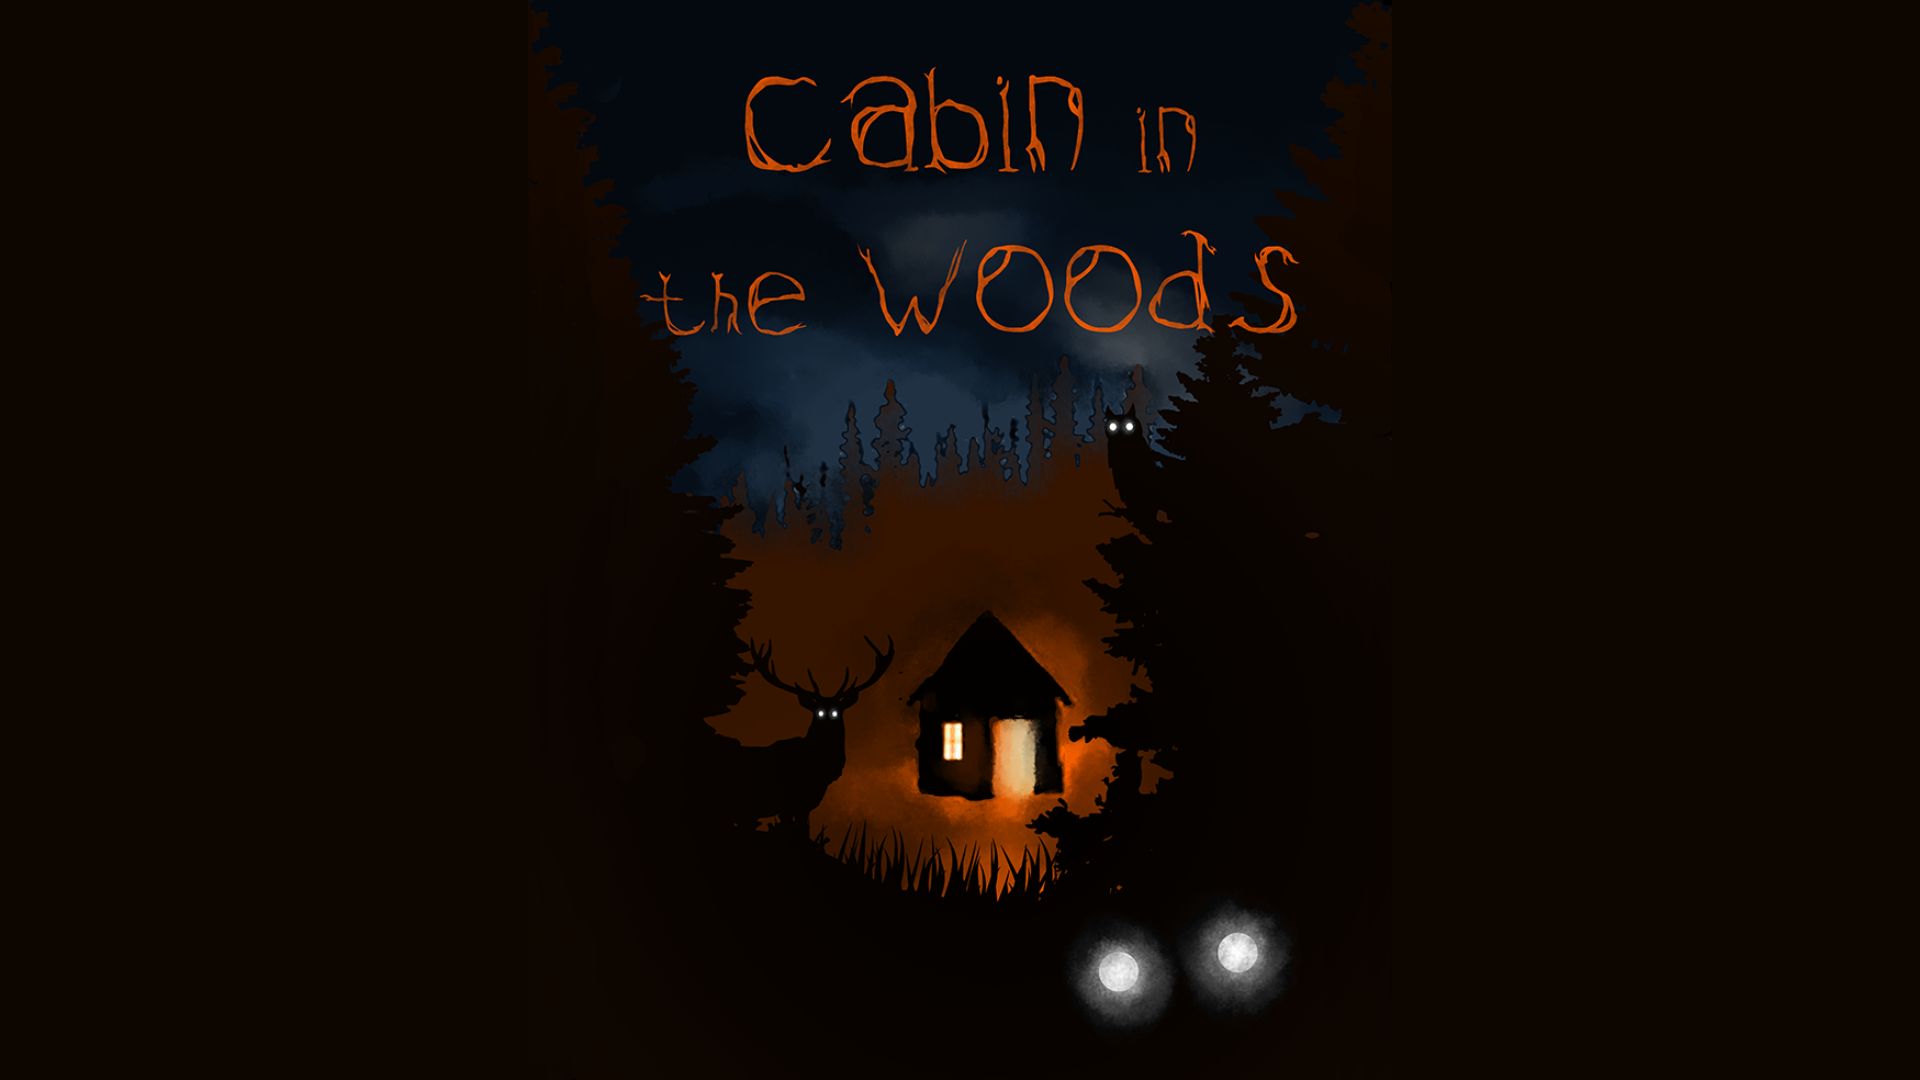 8 persons - Cabin in the Woods